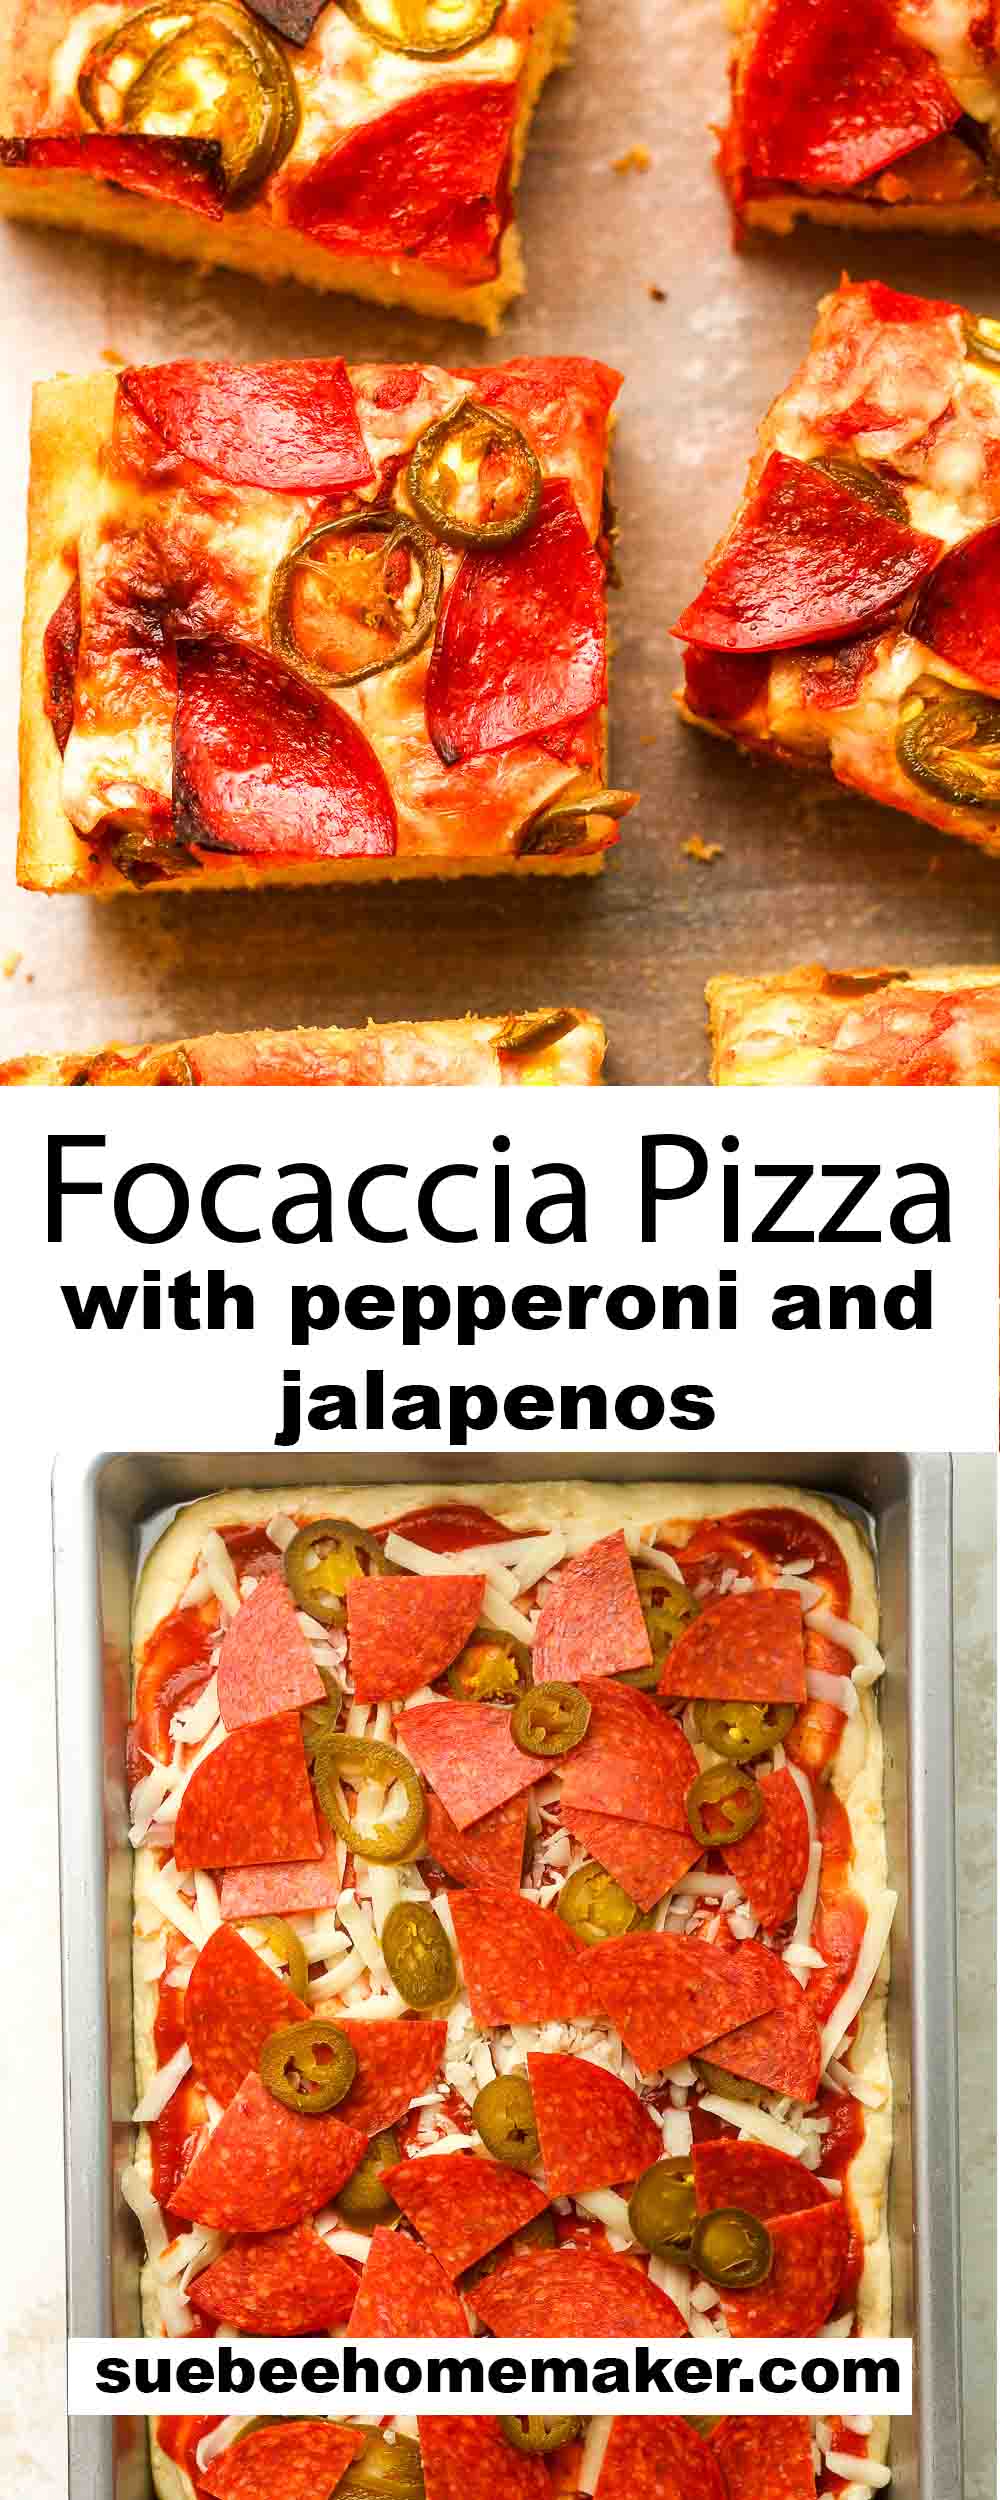 A collage of pics for focaccia pizza with pepperoni and jalapeños.